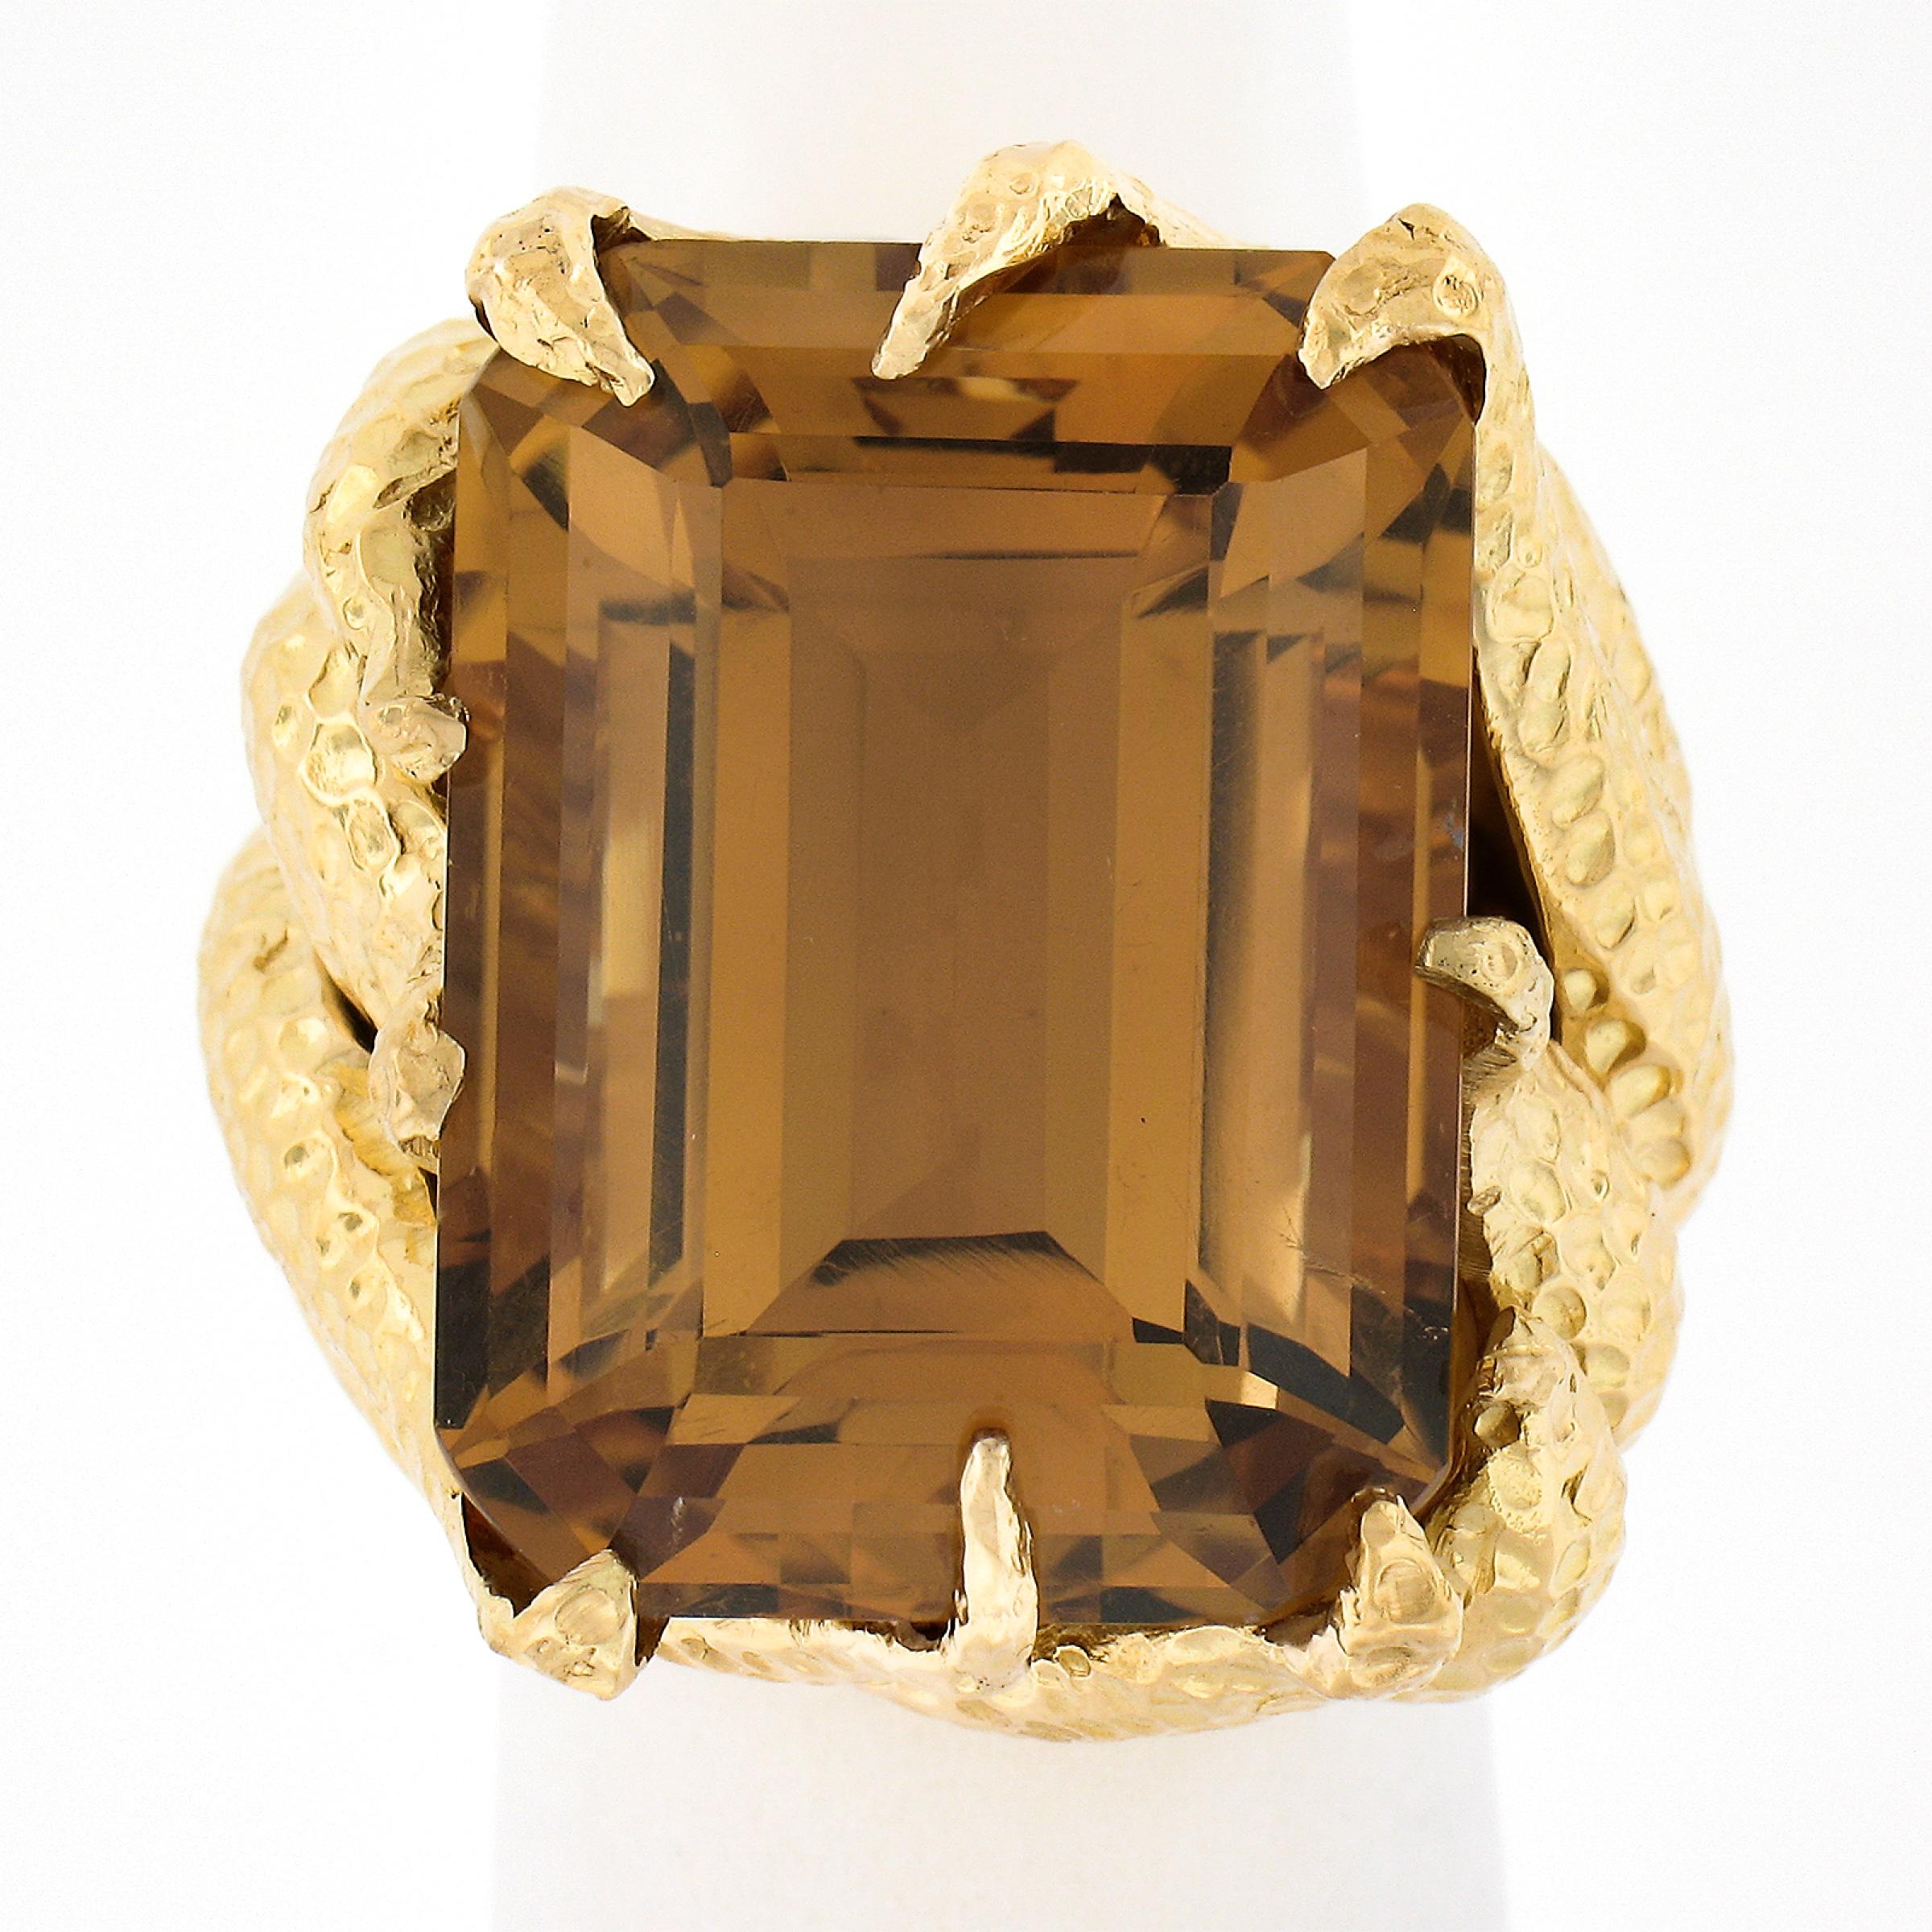 --Stone(s):--
(1) Natural Genuine Citrine - Emerald Cut - Multi-Prong Set - Rich Yellowish Orange Color -  22x16.3x12.4mm (approx.) - 28 to 30ct (approx.)

Material: Solid 18k Yellow Gold
Material Weight: 30.91 Grams
Ring Size: 5.5 (Fitted on a